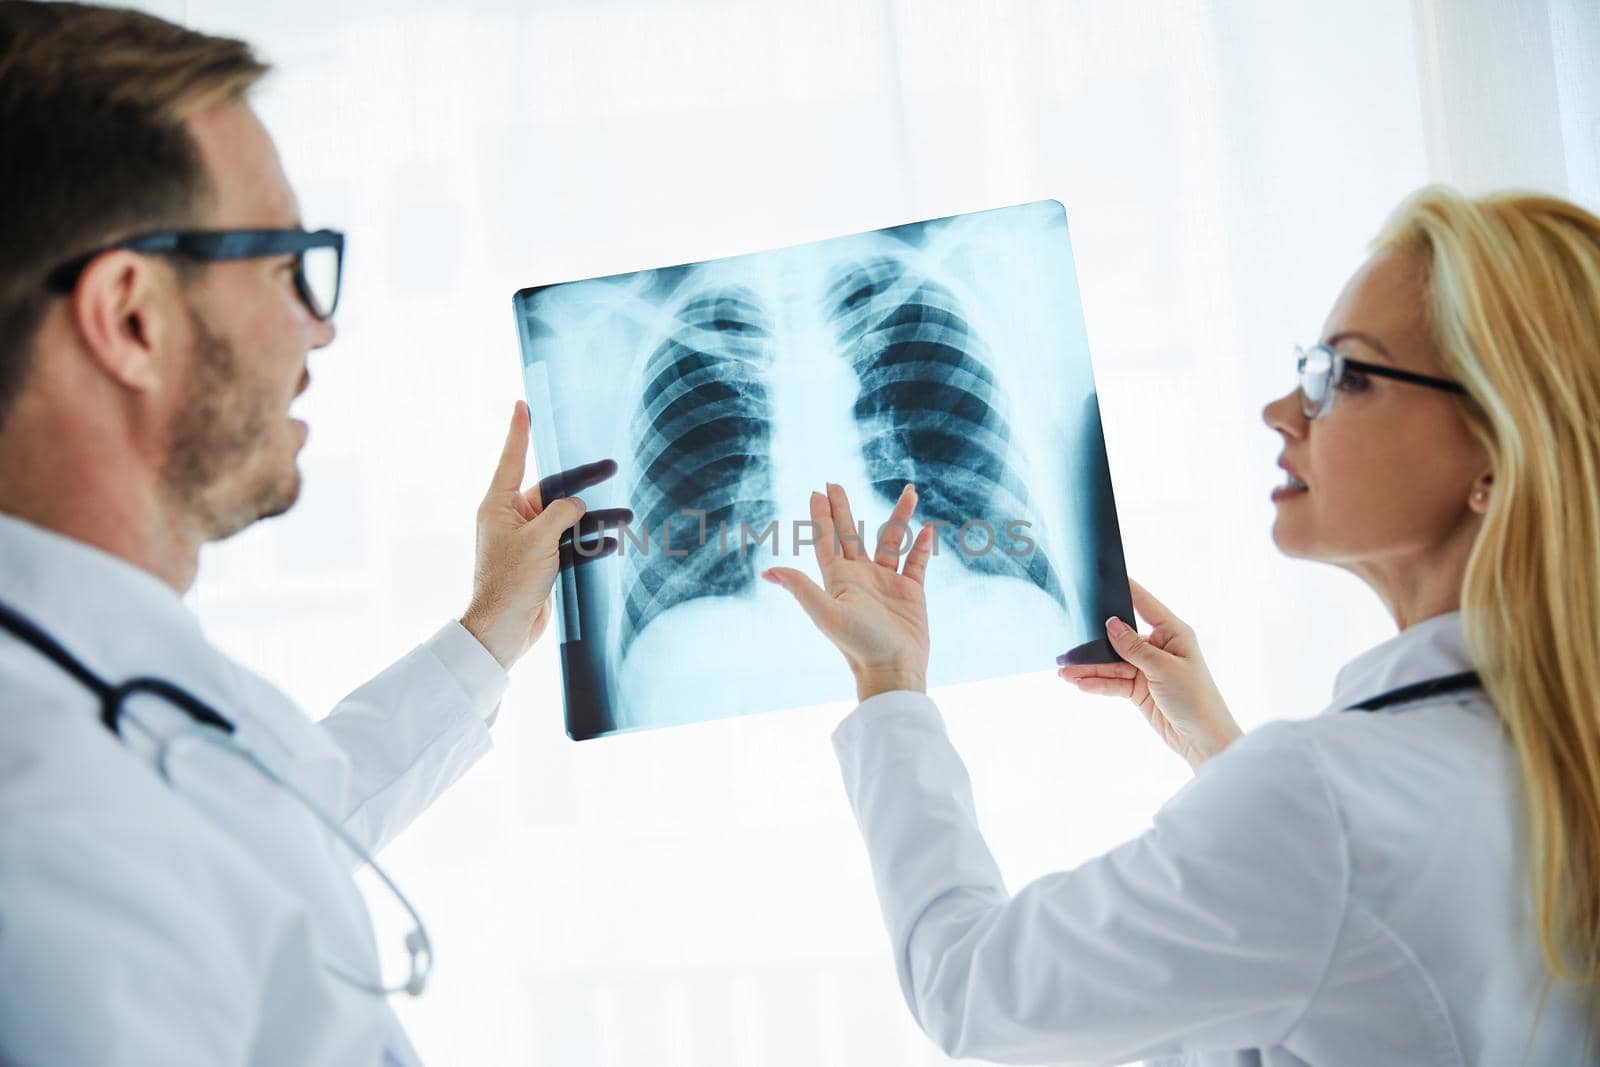 Doctors looking at a x-ray image in their hospital office